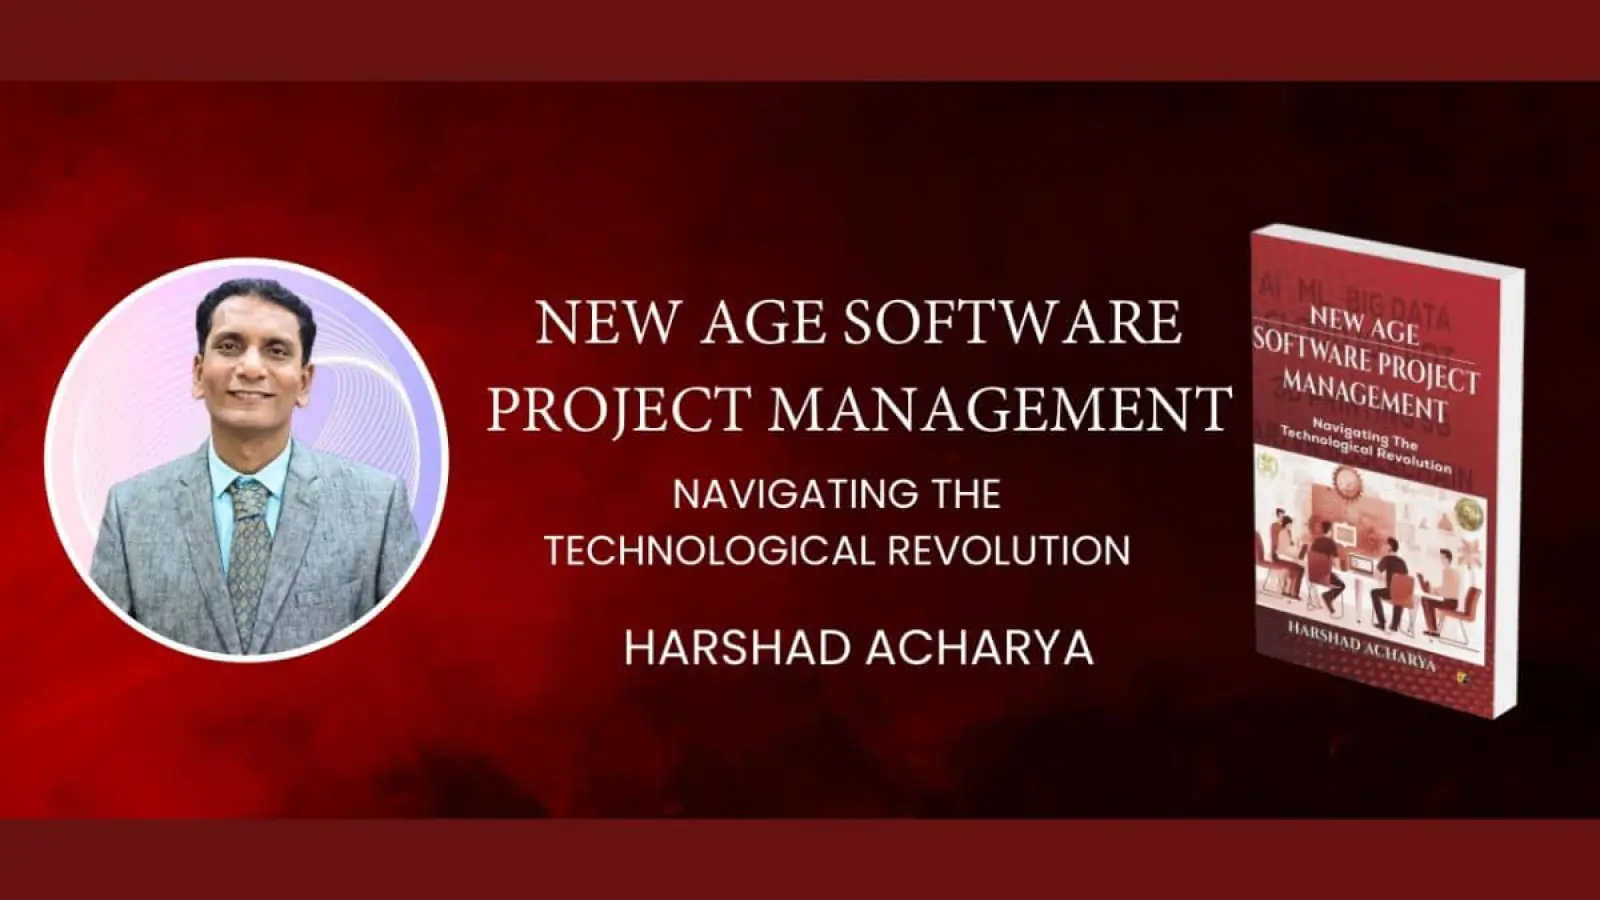 New Age Software Project Management: Harshad Acharya’s Definitive Guide